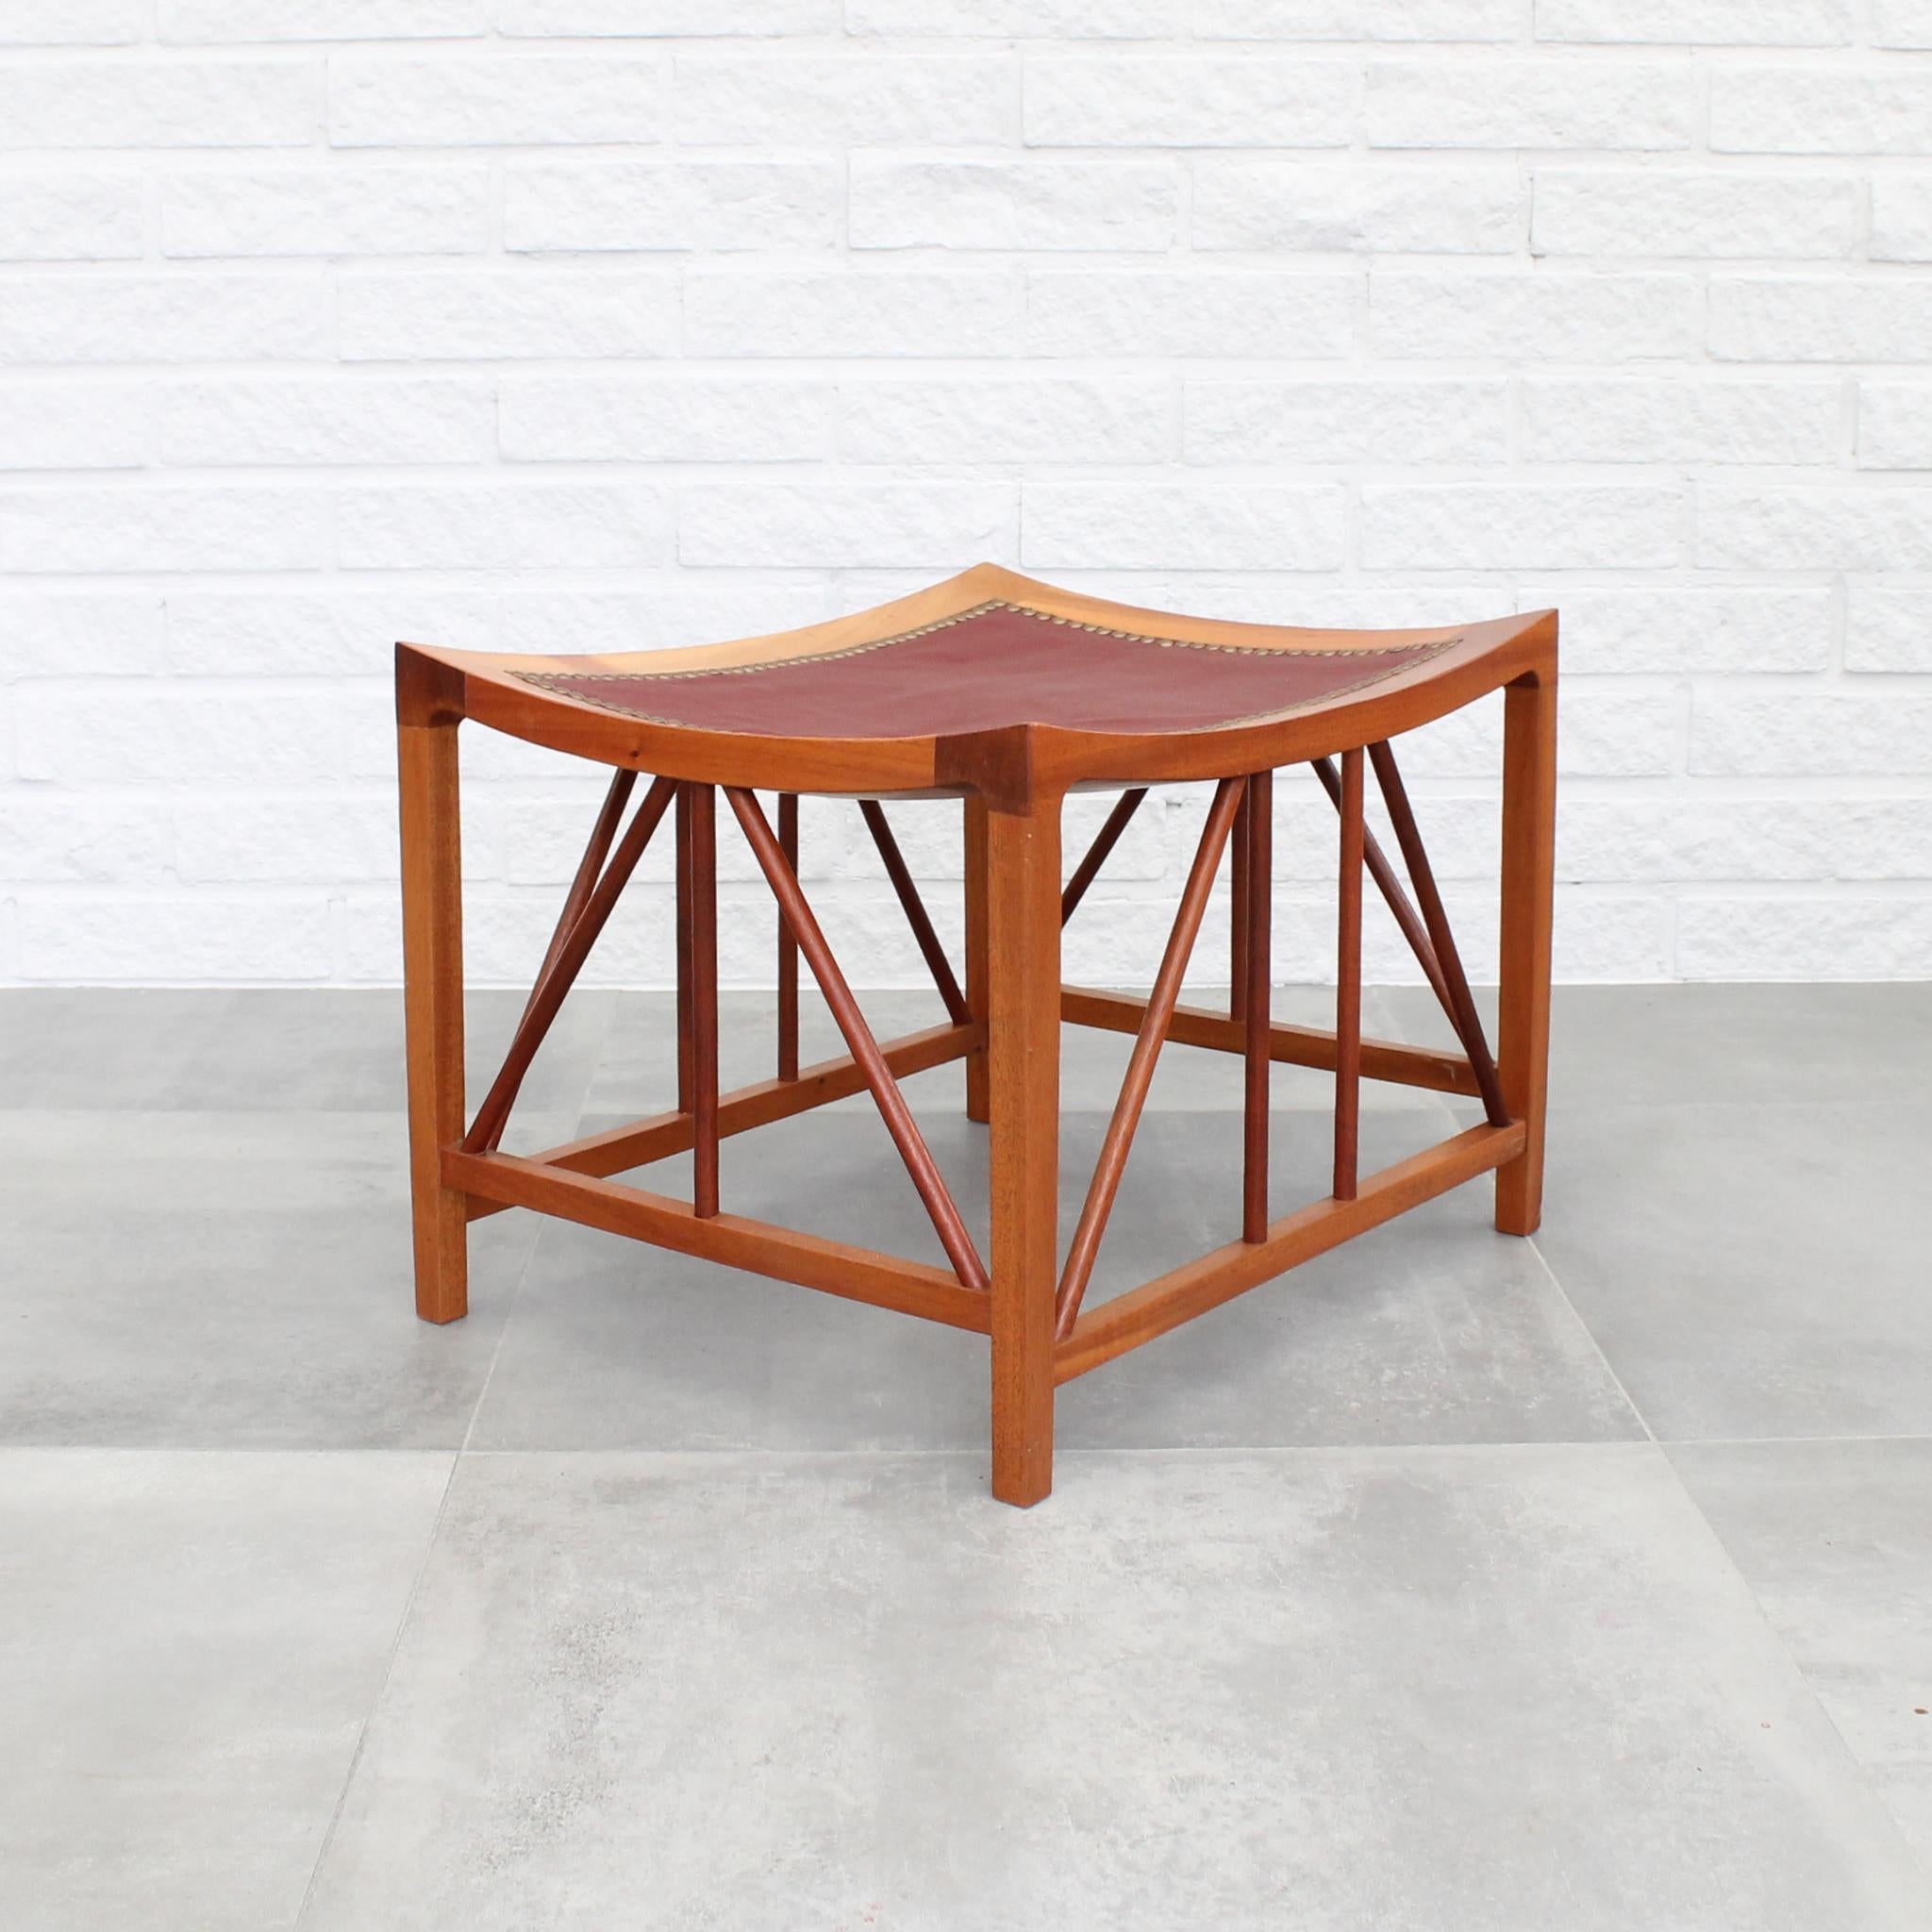 Stool model 1063, designed by Josef Frank for Firma Svenskt Tenn. Crafted from solid walnut and adorned with red leather upholstery, it features decorative brass rivets encircling the seat. Josef Frank drew inspiration from an ancient source for